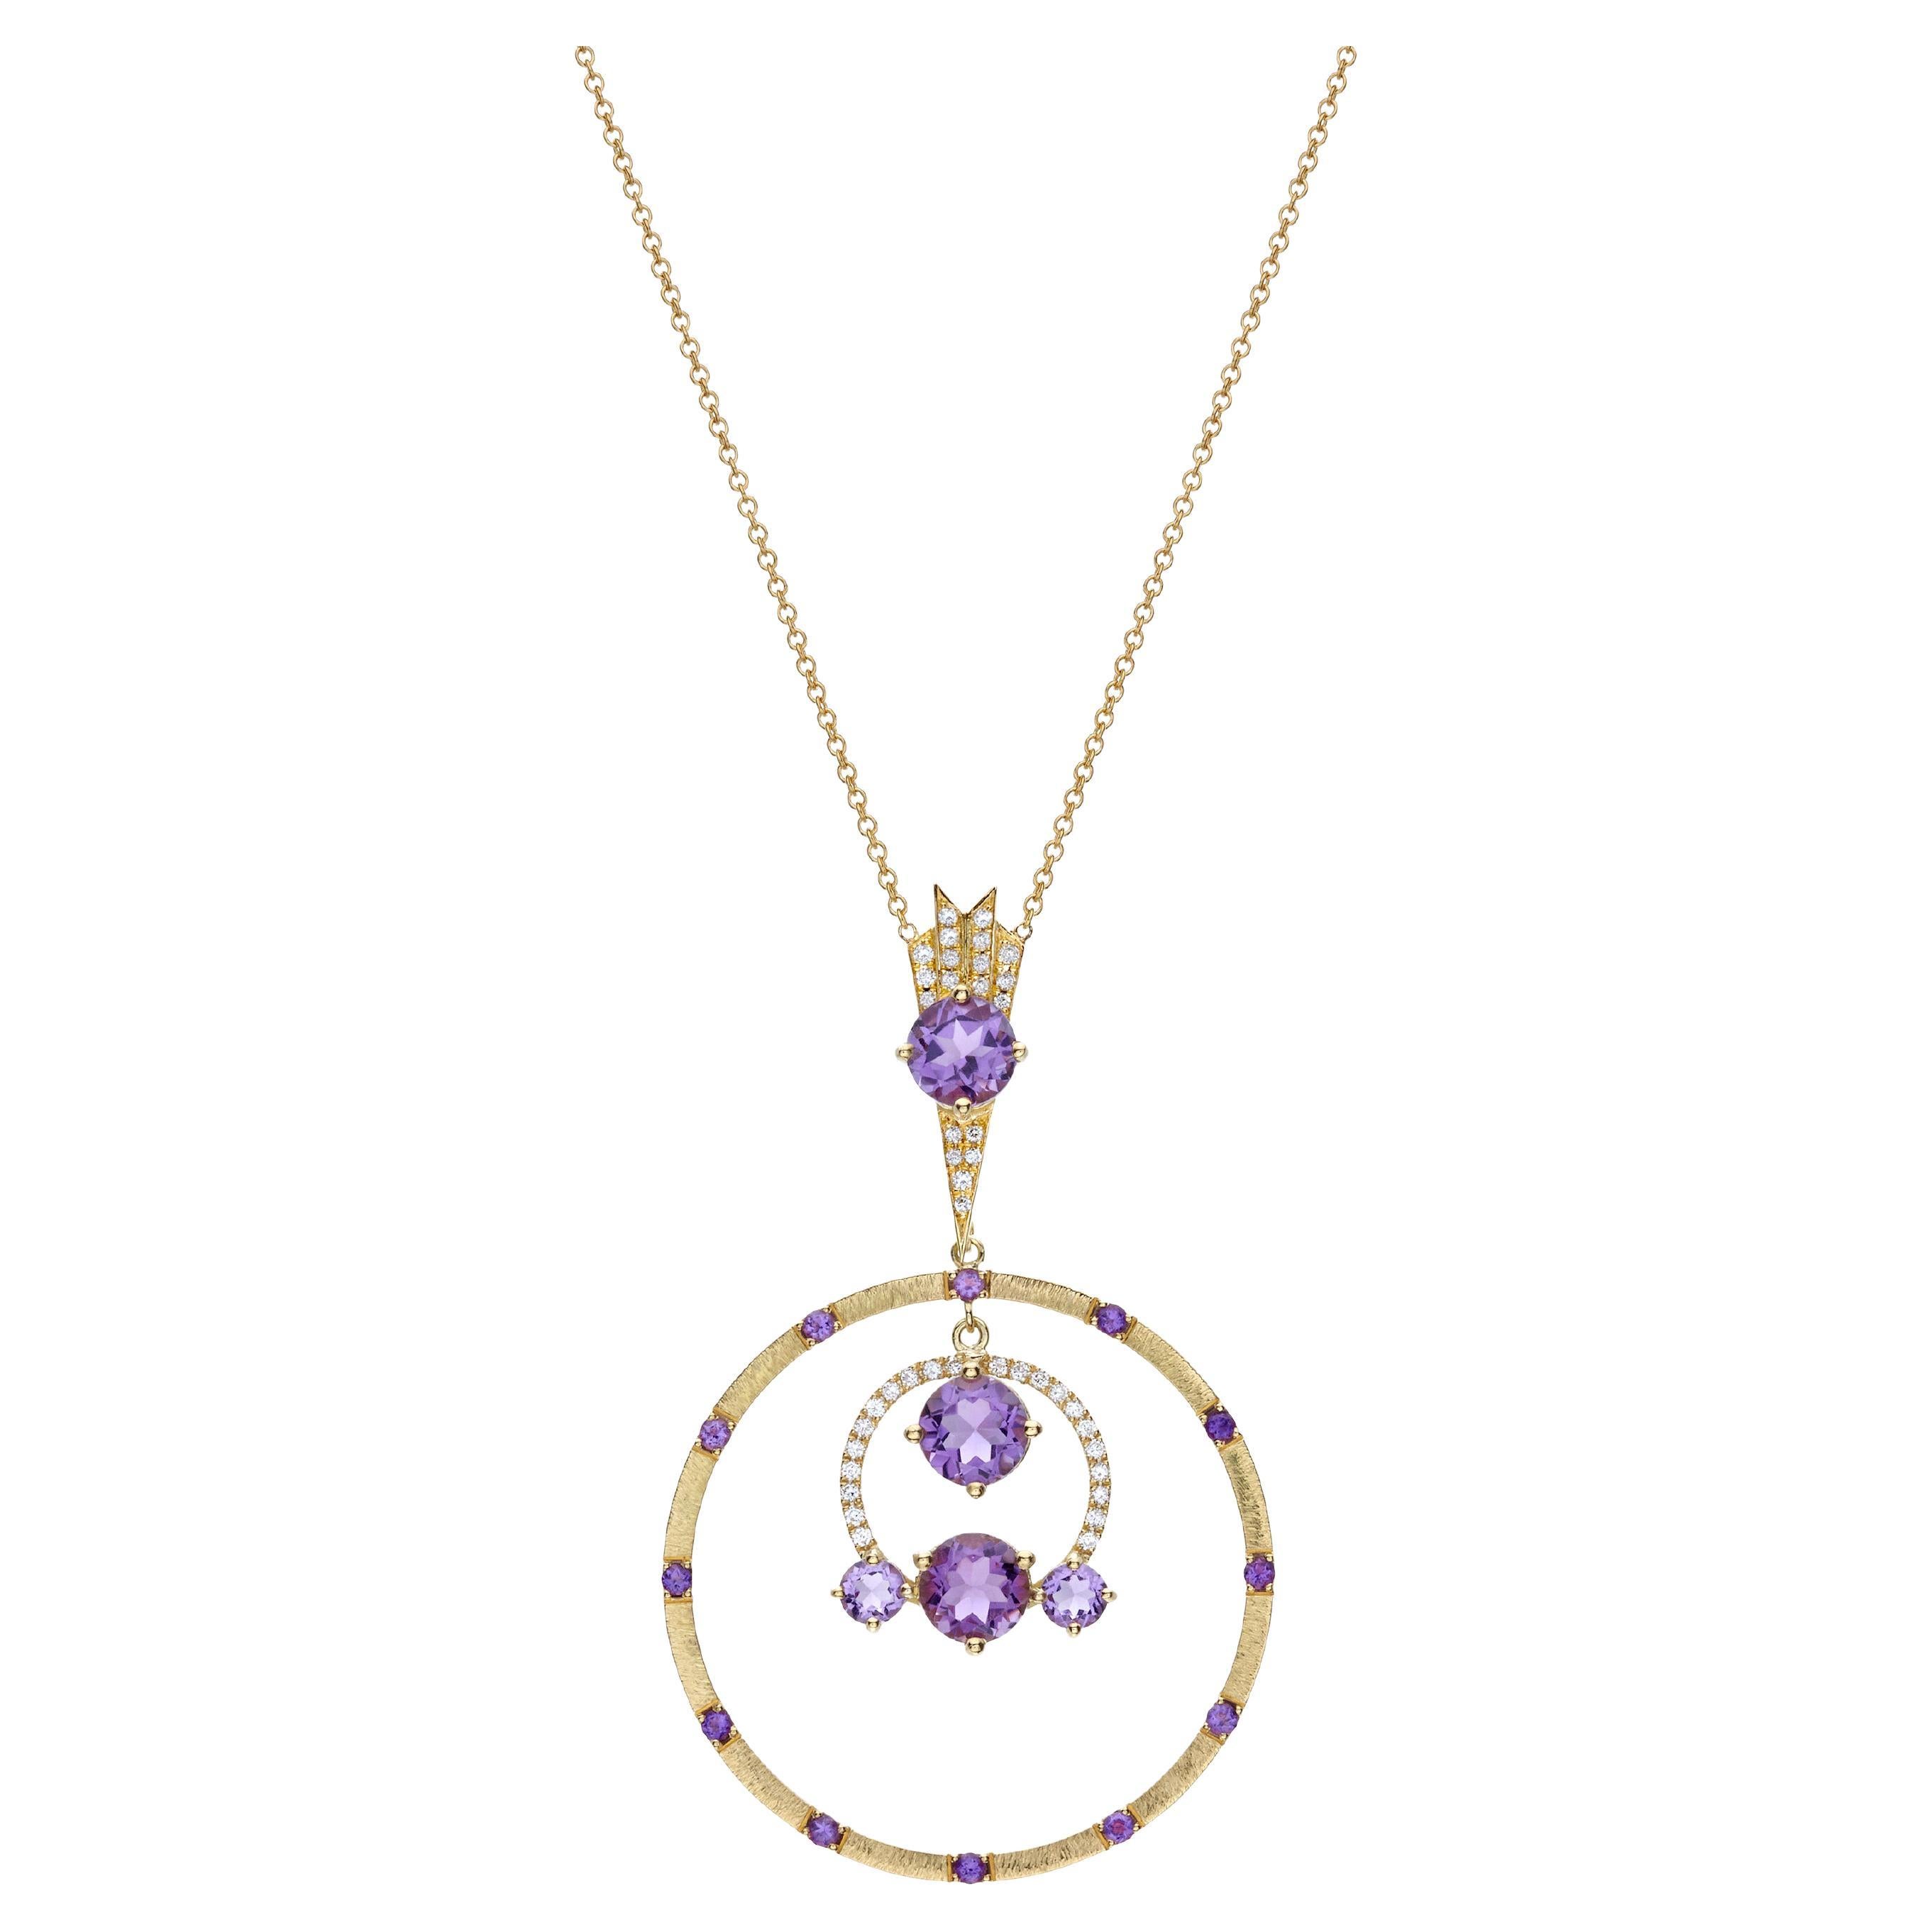 Twin Hearts Aura Pendant Necklace in 18Kt Yellow Gold with Amethyst and Diamonds For Sale